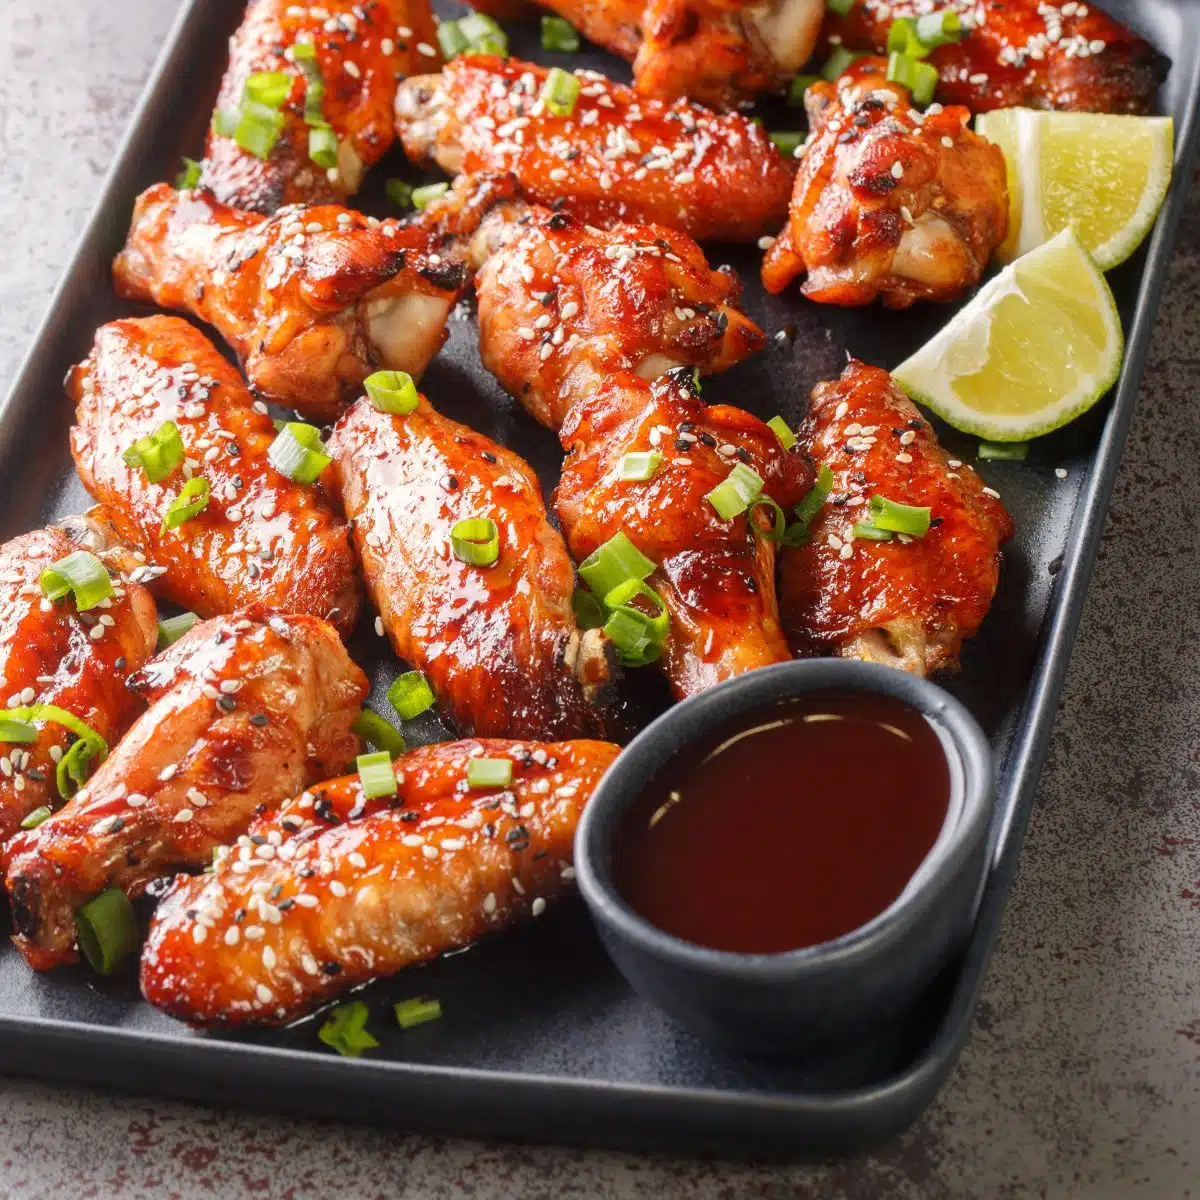 Chicken wings with hoisin sauce.